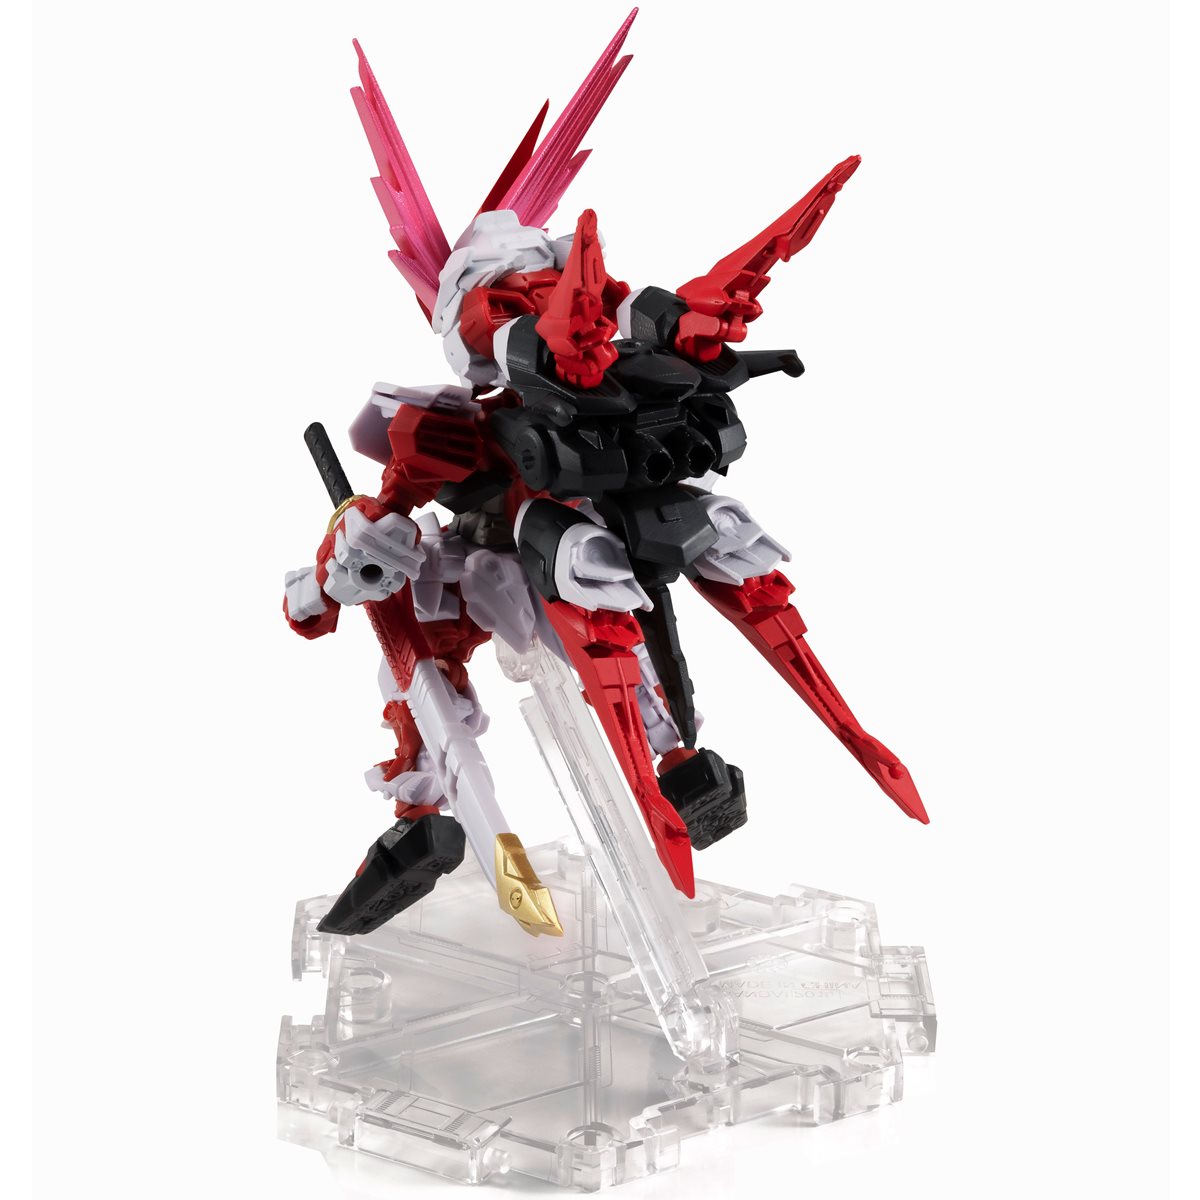 Mobile Suit Gundam Seed Destiny Astray R Gundam Astray Red Dragon Nxedge Style Action Figure